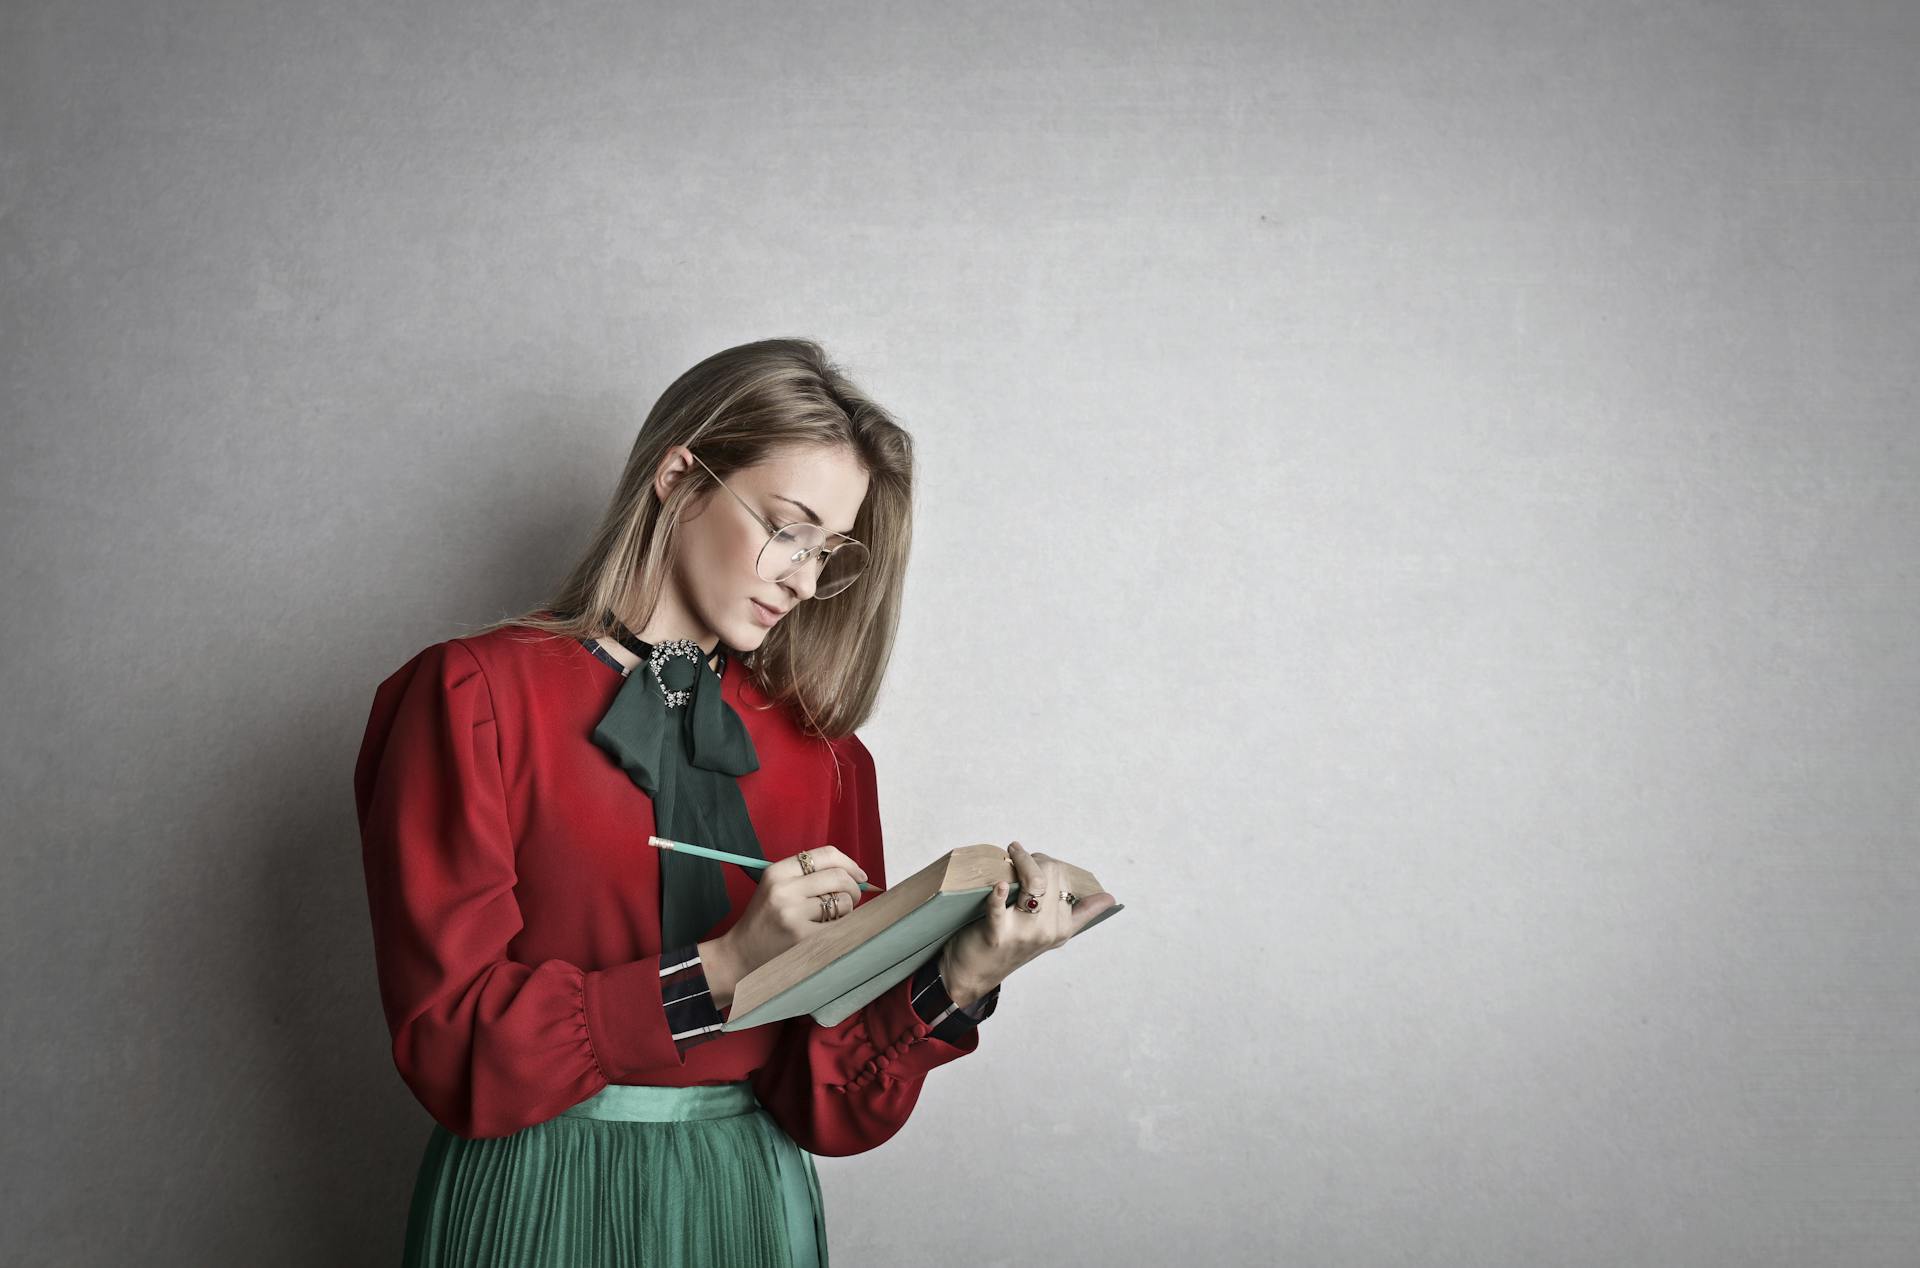 Pensive attentive woman in glasses and elegant vintage outfit focusing and taking notes with pencil in book while standing against gray wall